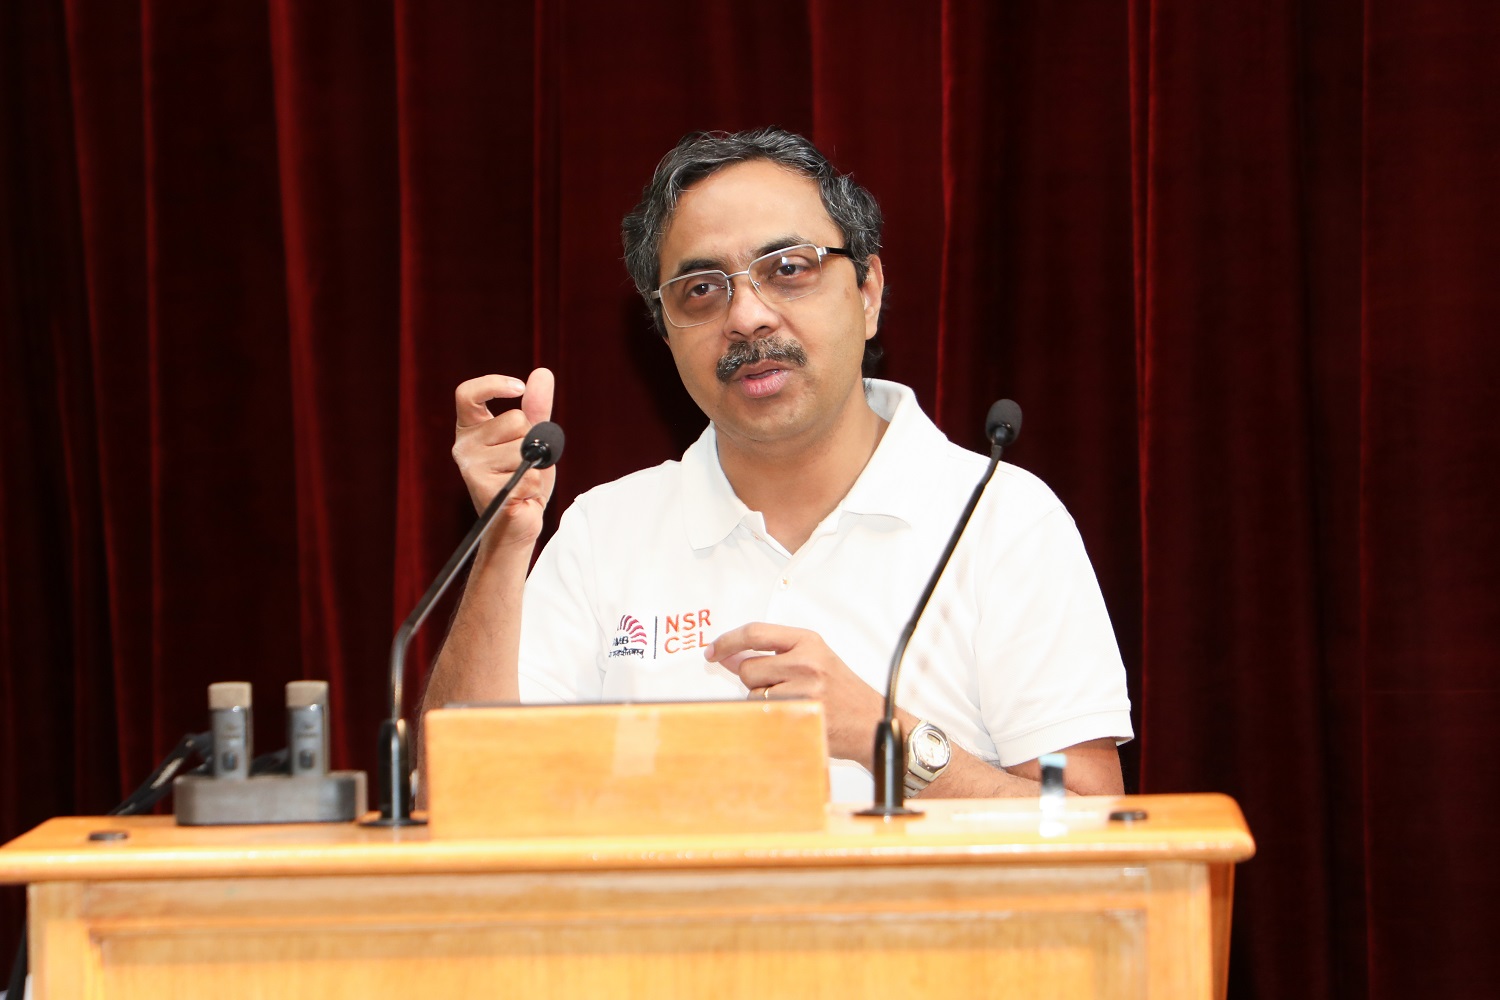 Anand Sri Ganesh, COO, NSRCEL at IIMB, welcomes participants on 9th March 2023.